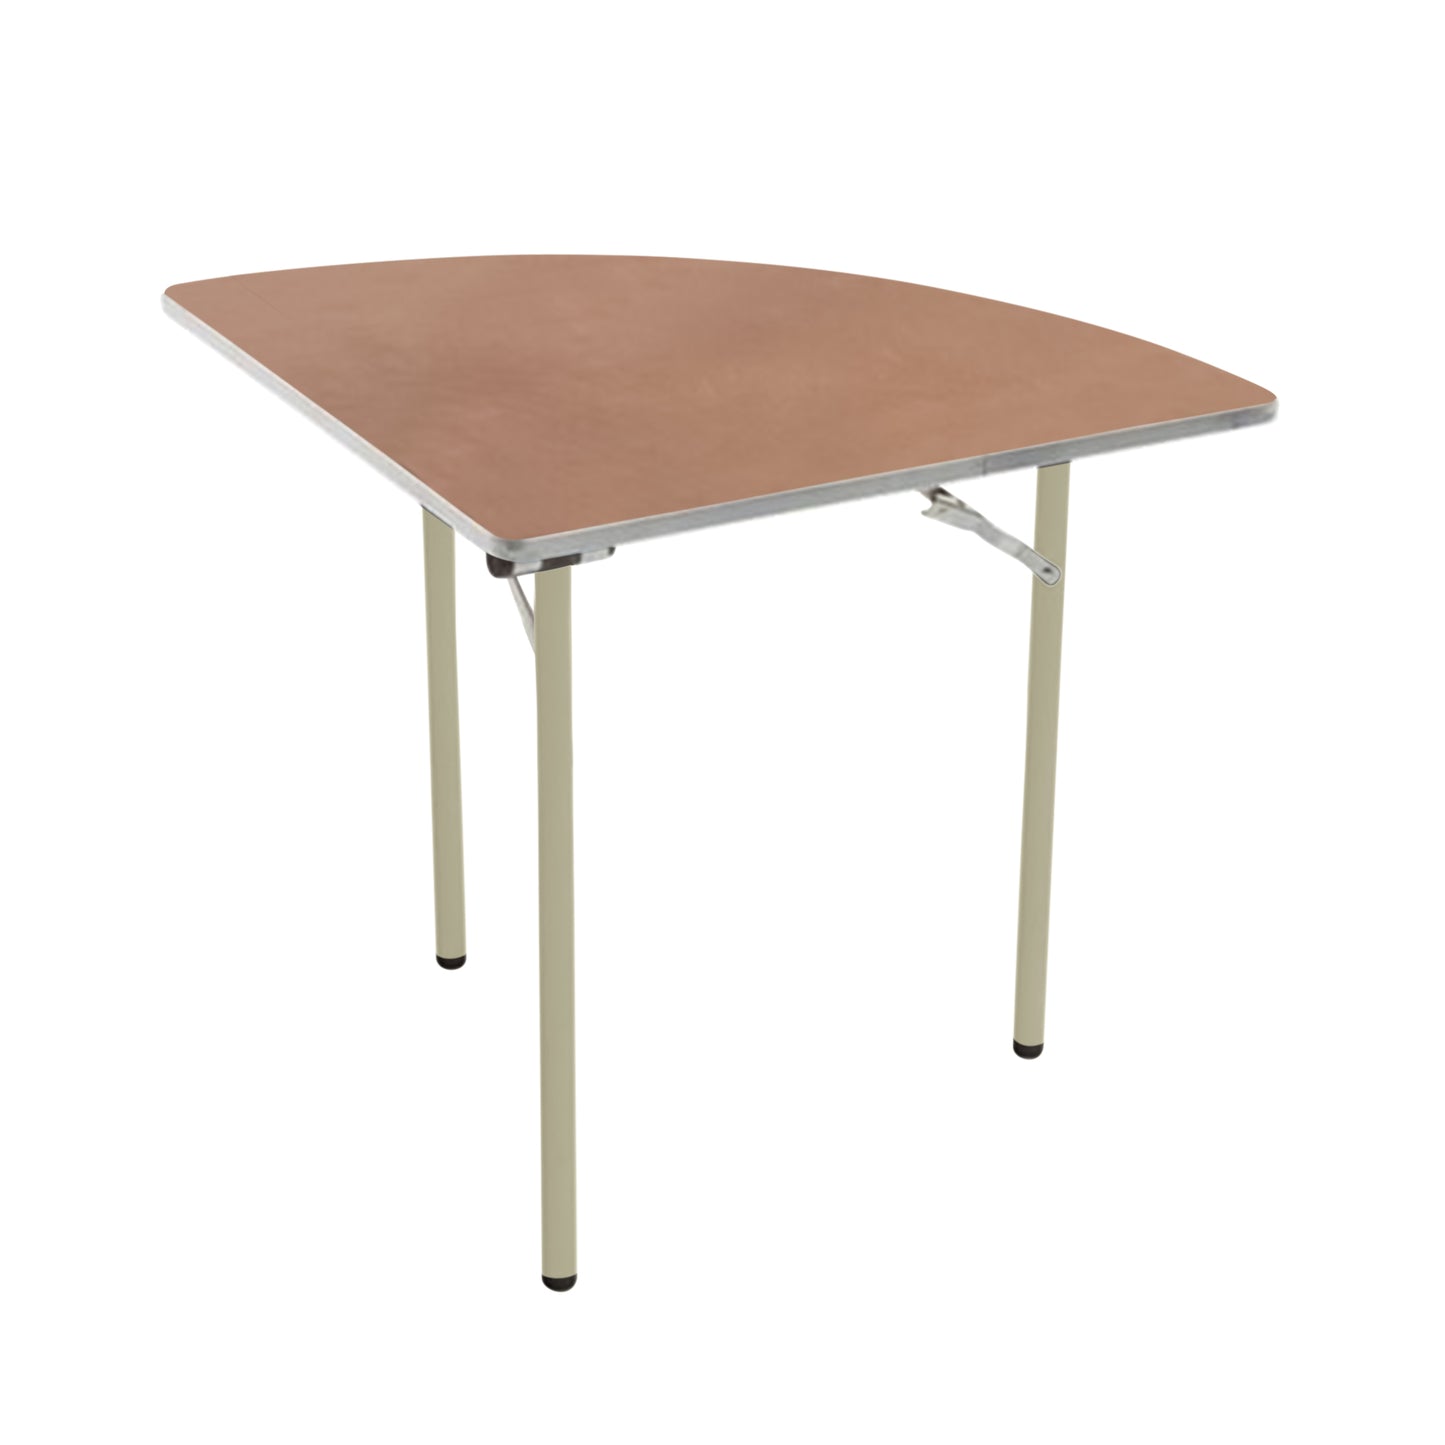 AmTab Folding Table - Plywood Stained and Sealed - Aluminum Edge - Quarter Round - Quarter 72" Diameter x 29"H  (AmTab AMT-QR72PA)